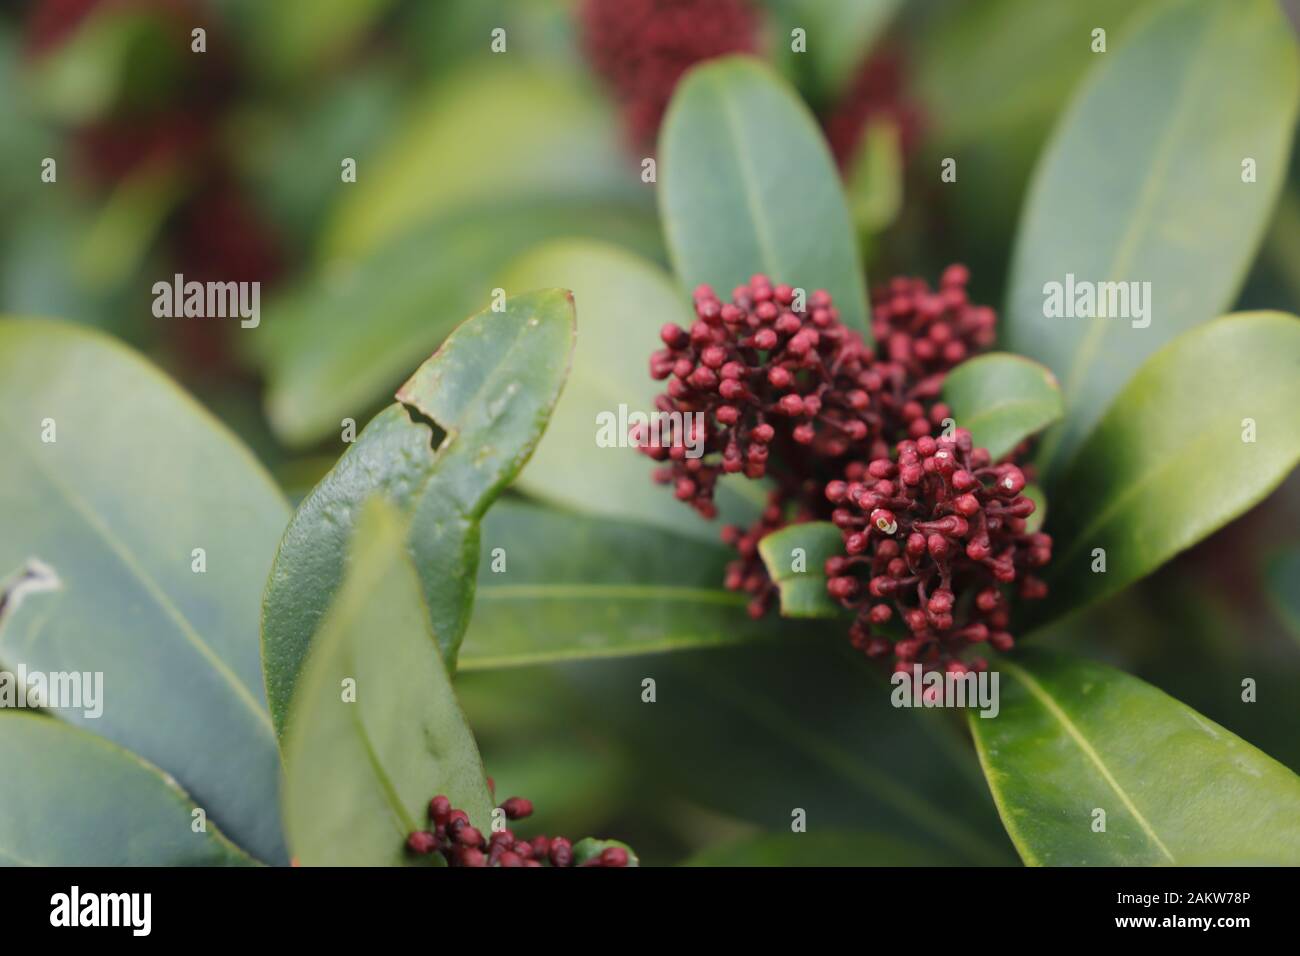 Skimmia is a beautiful plant which gives flowers in the winter and spring. It is used for Christmas also. Stock Photo